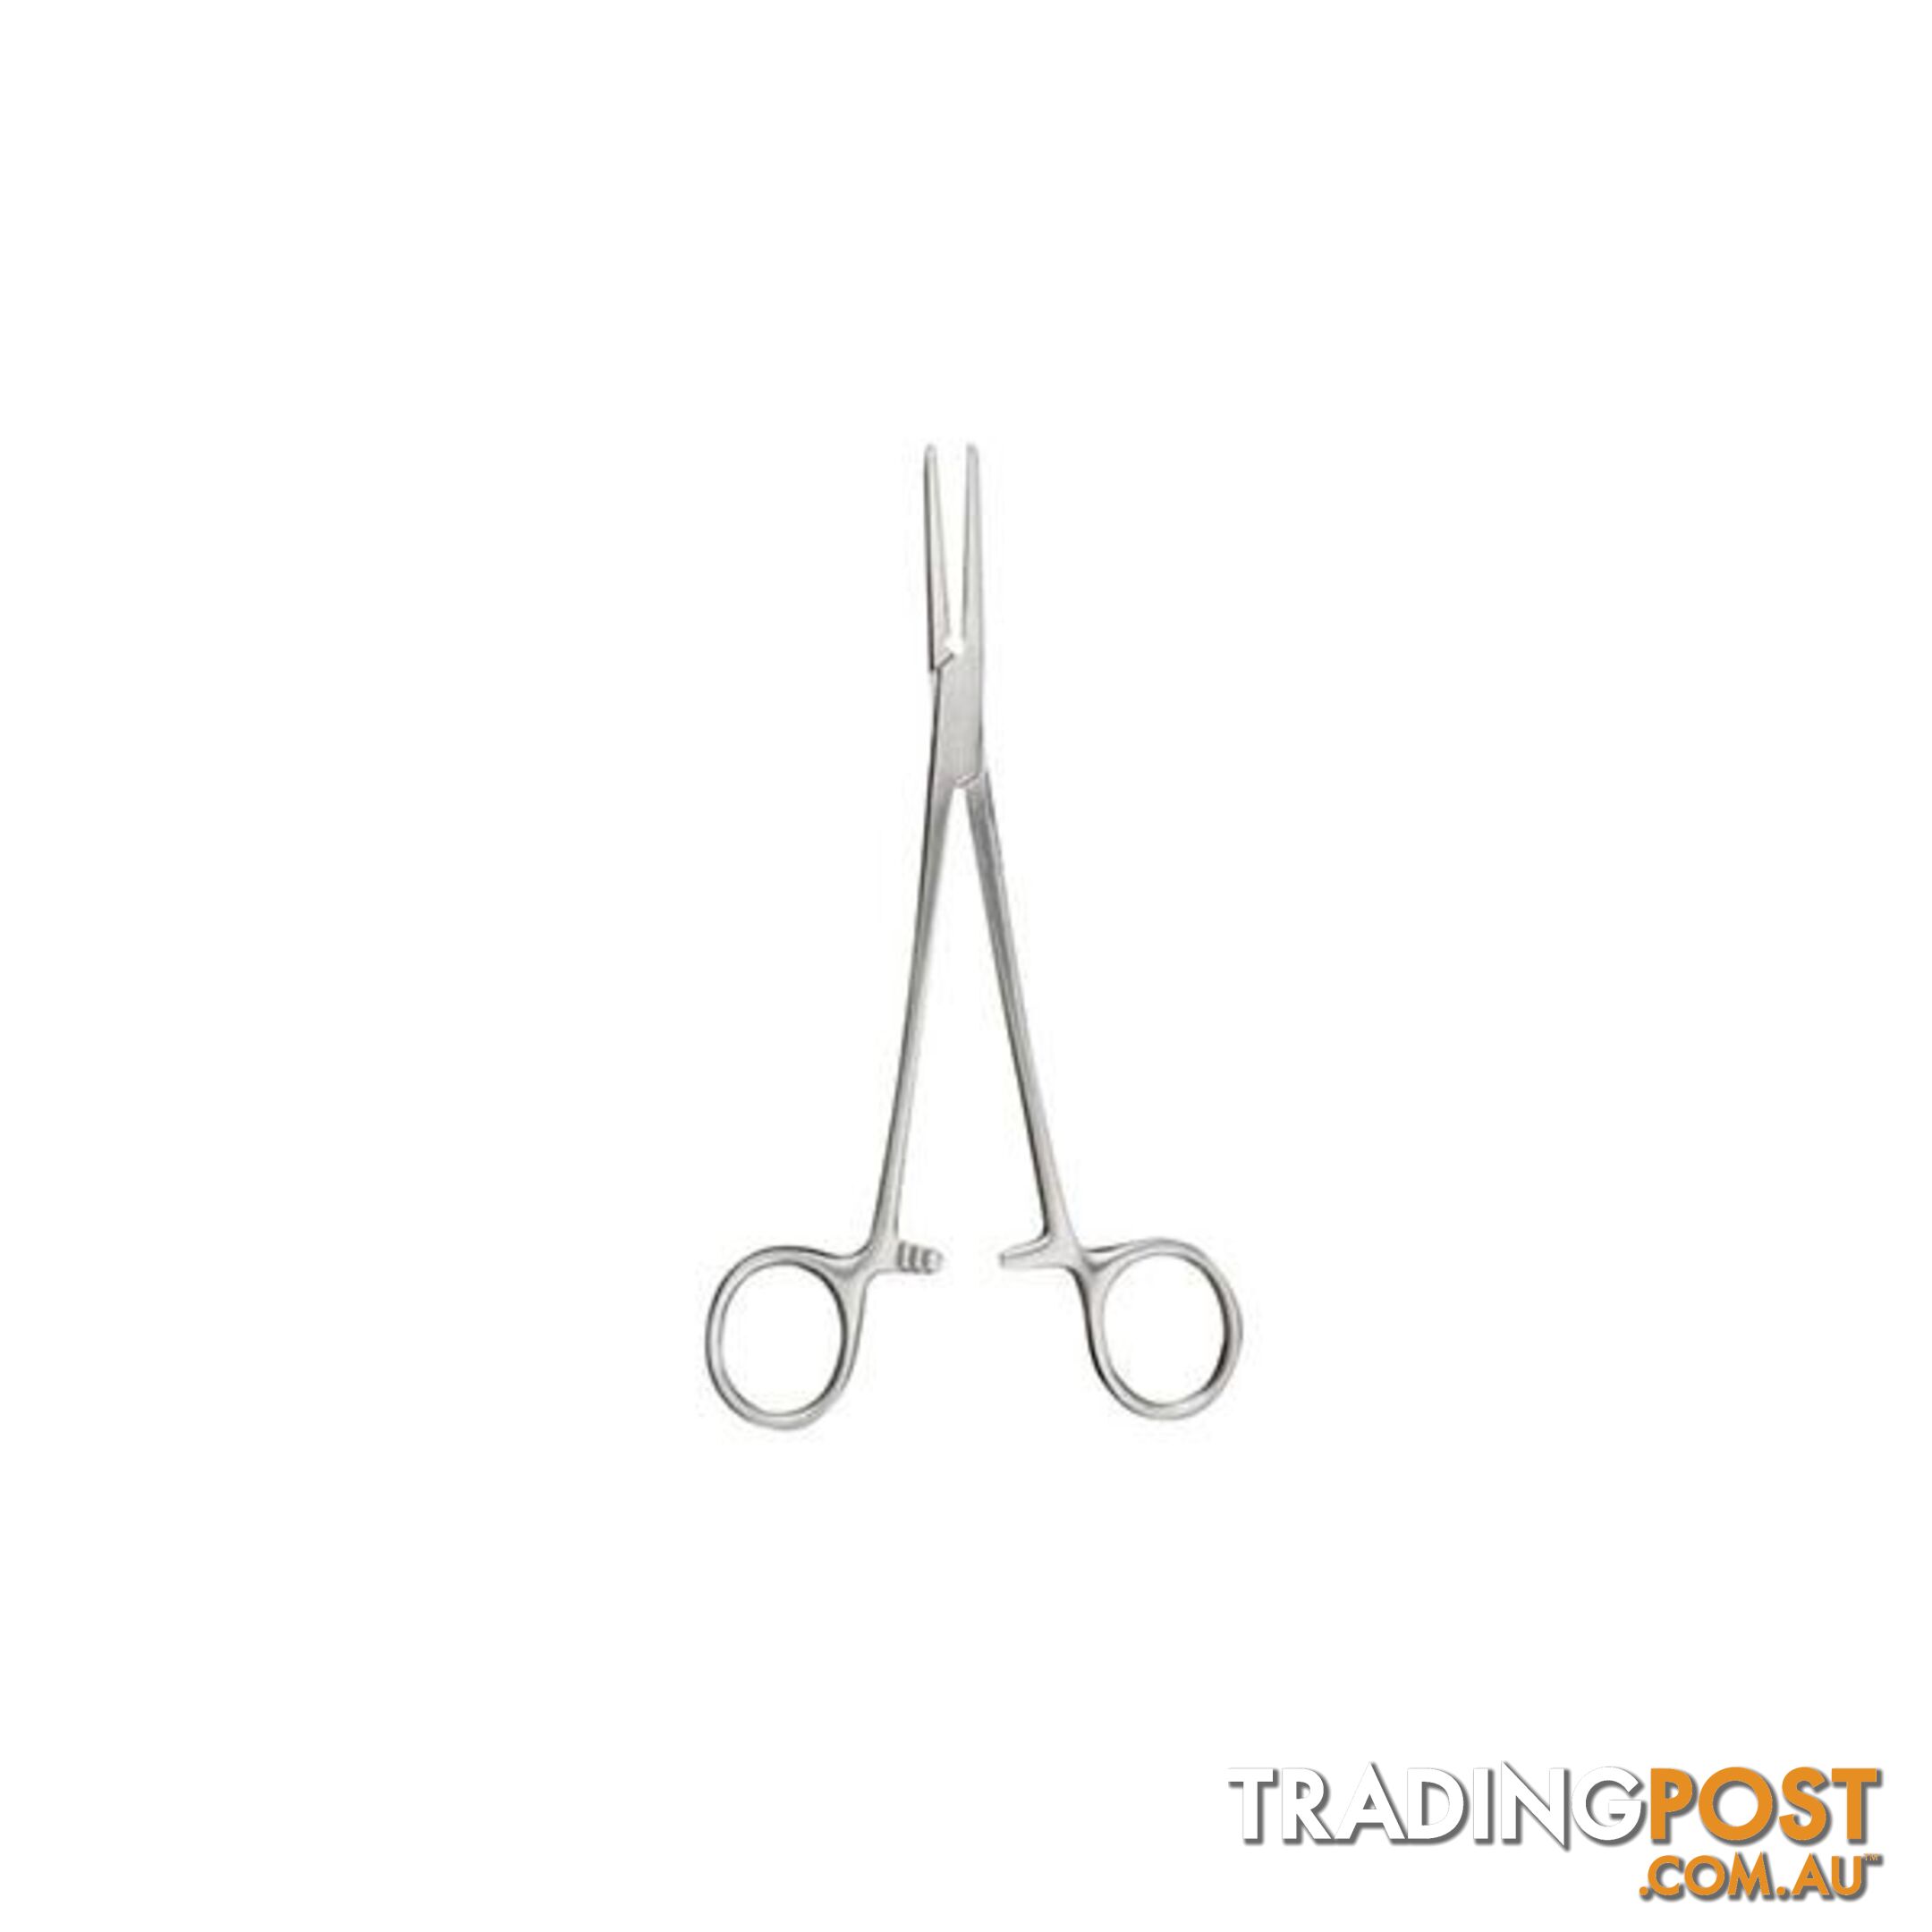 Forceps Spencer Wells Straight Theatre - Forceps - 7427046221078